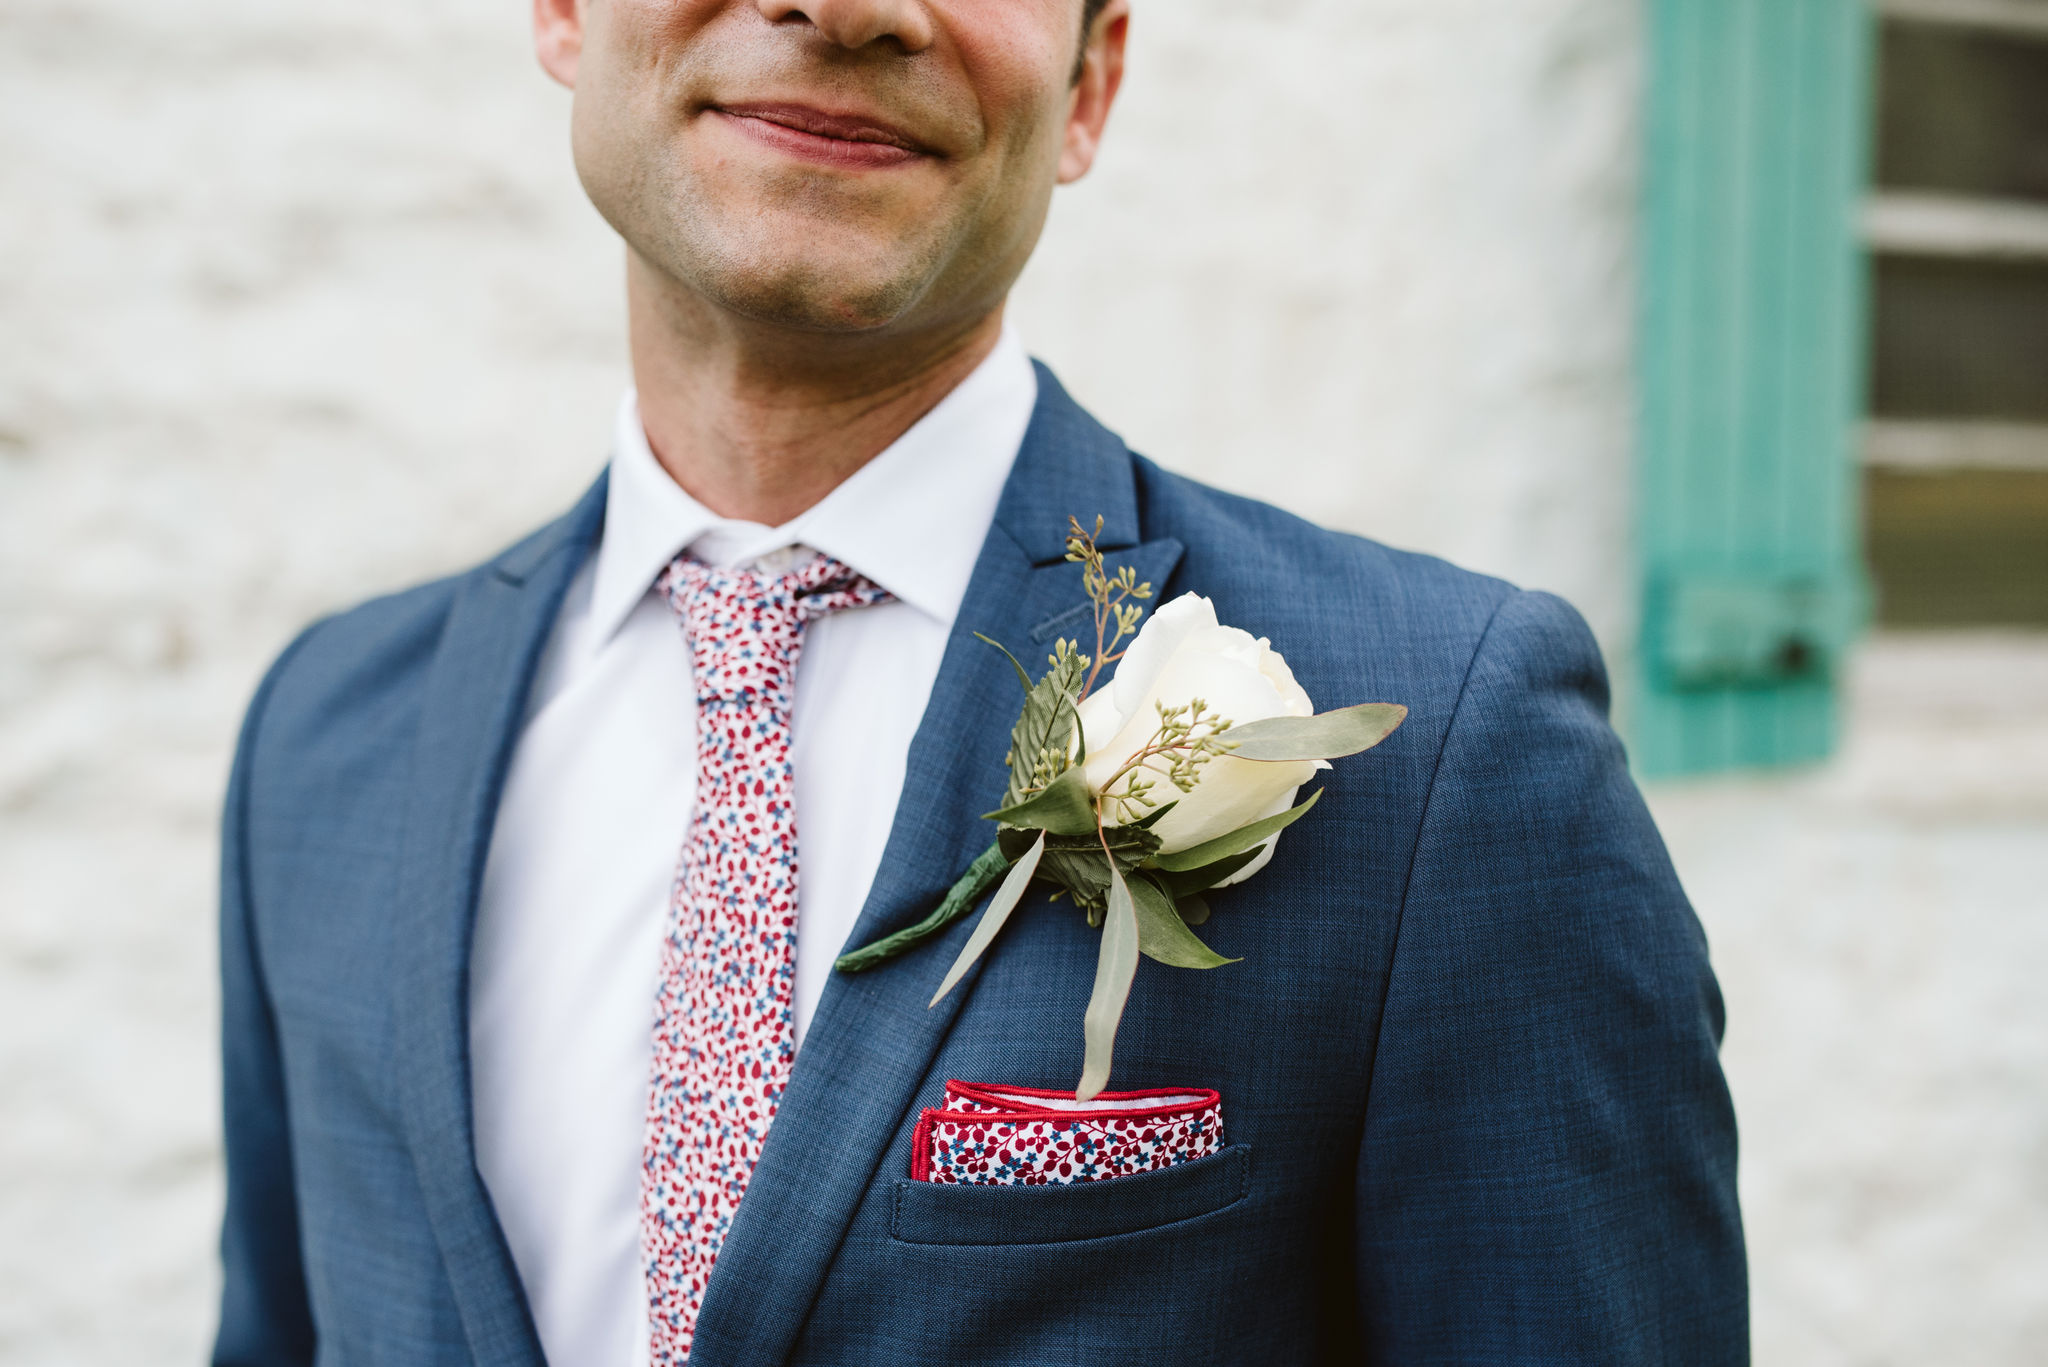  Phoenix Maryland, Baltimore Wedding Photographer, Eagle’s Nest Country Club, Classic, Romantic, White Boutonniere, Knotty Tie Pocketsquare 